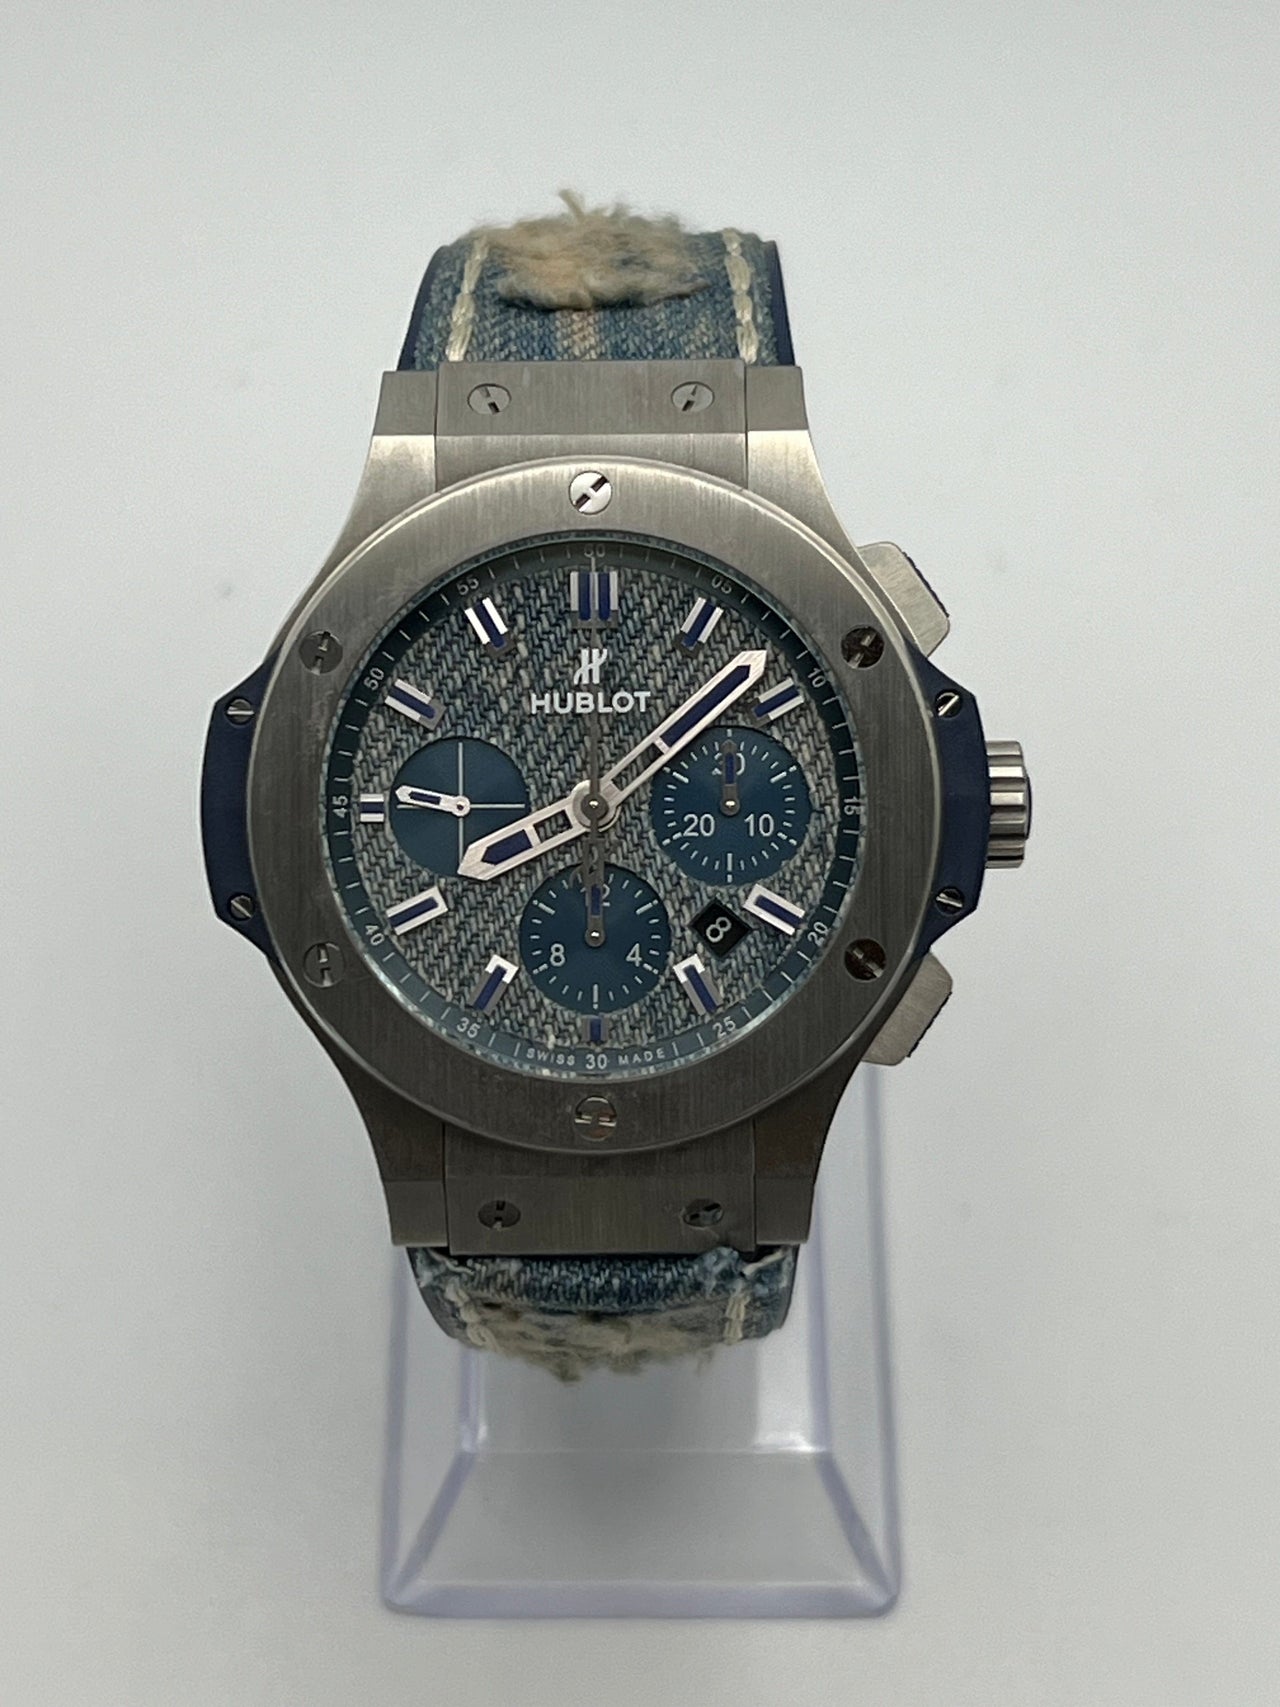 Hublot Big Bang "Jeans" Chronograph 301.SL.2770.NR.JEANS Stainless Steel Limited Edition (2015)